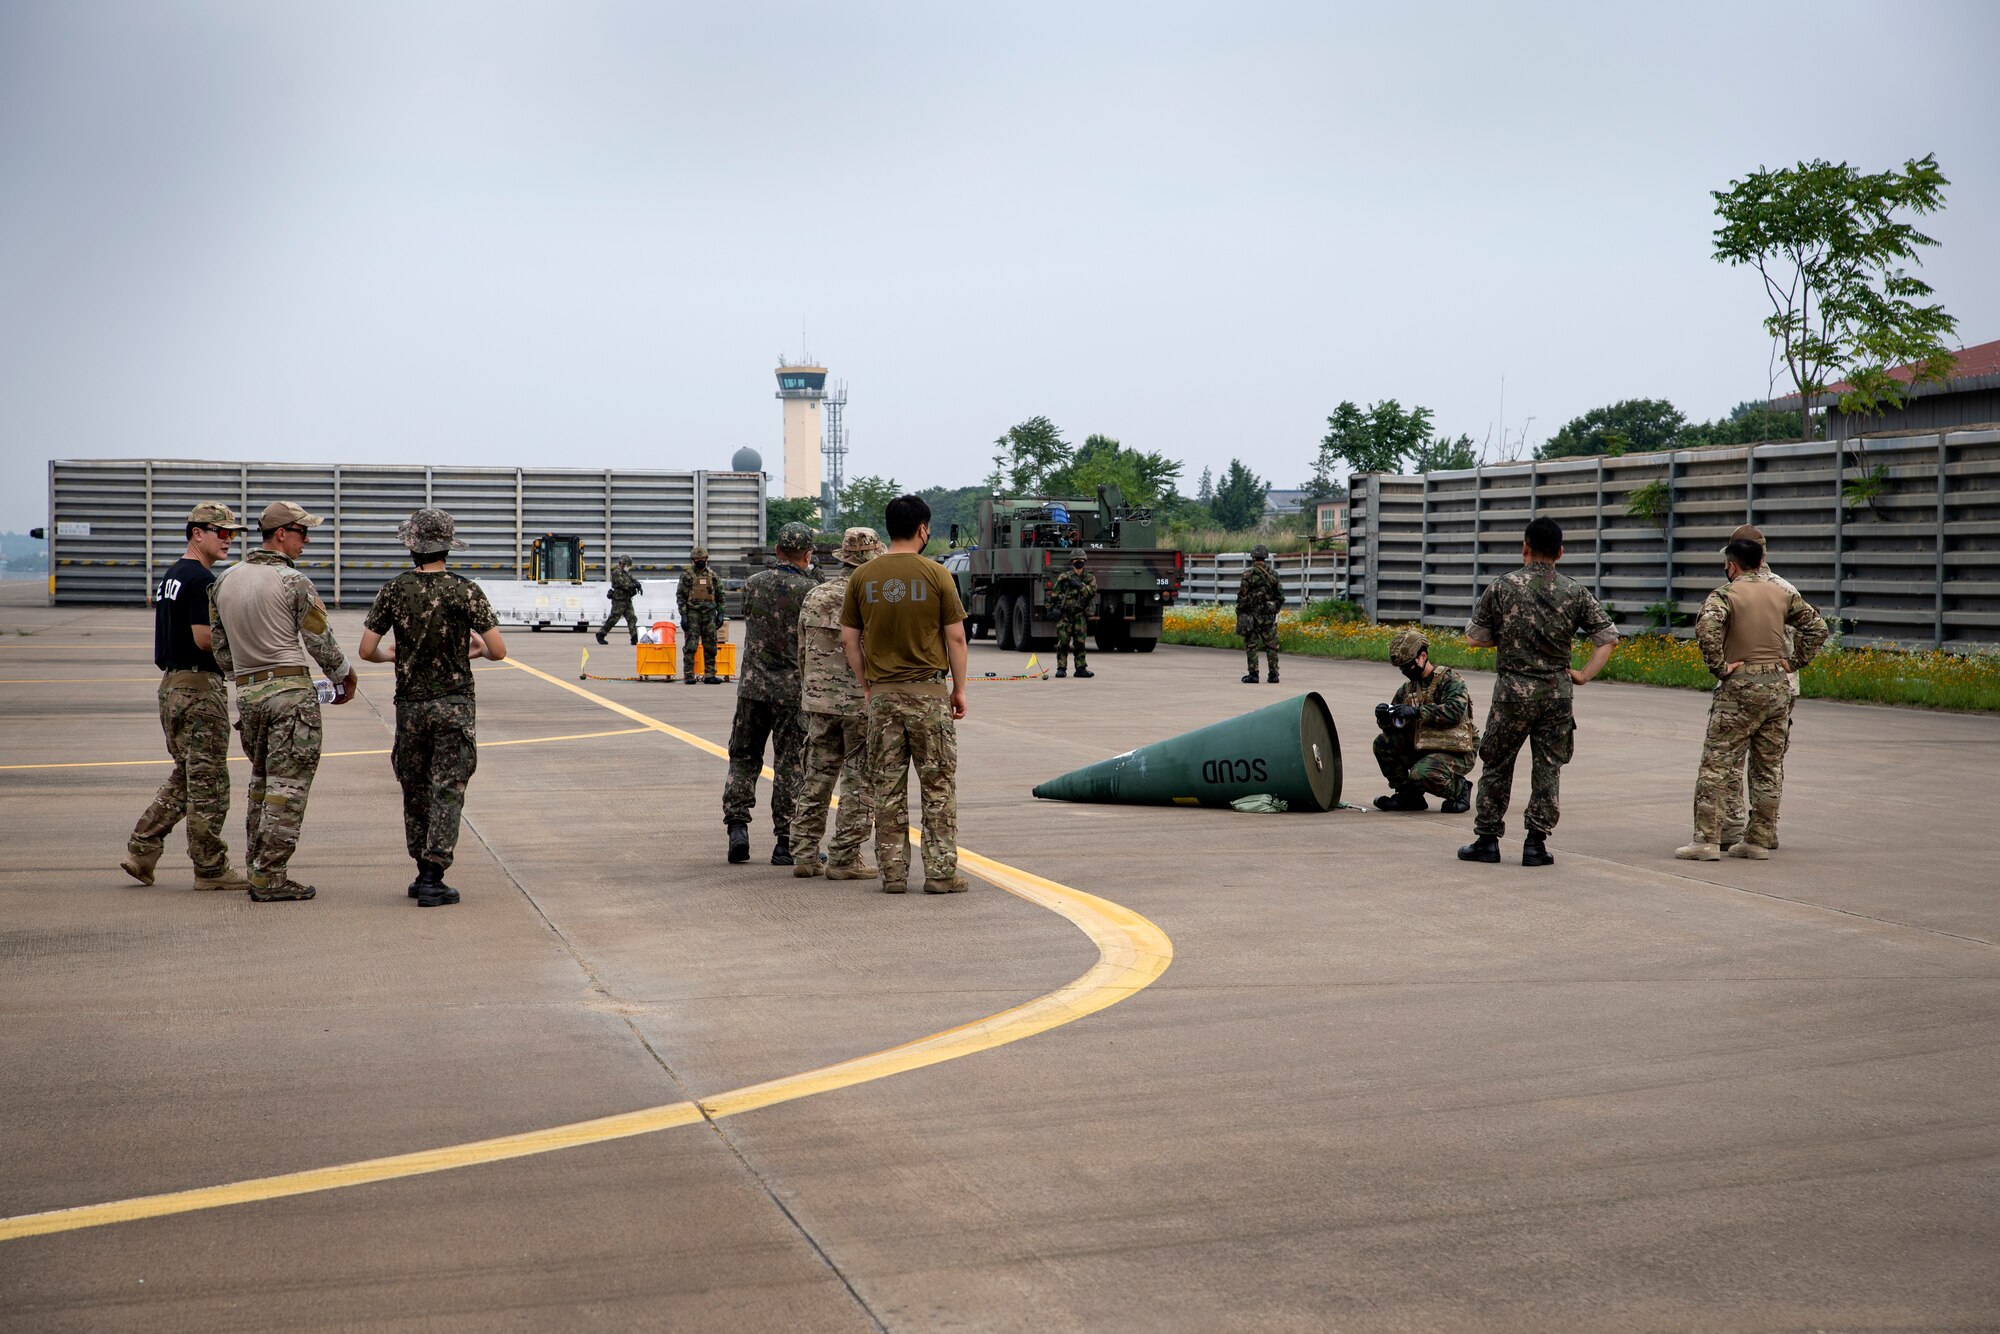 U.S. Air Force members assigned to the 35th Civil Engineer Squadron, Explosive Ordnance Disposal (EOD) flight from Misawa Air Base, Japan, observe Republic of Korea Air Force (ROKAF) EOD members respond to a chemical weapon scenario as part of a bilateral training conducted at Suwon Air Base, Republic of Korea, July 6, 2022.